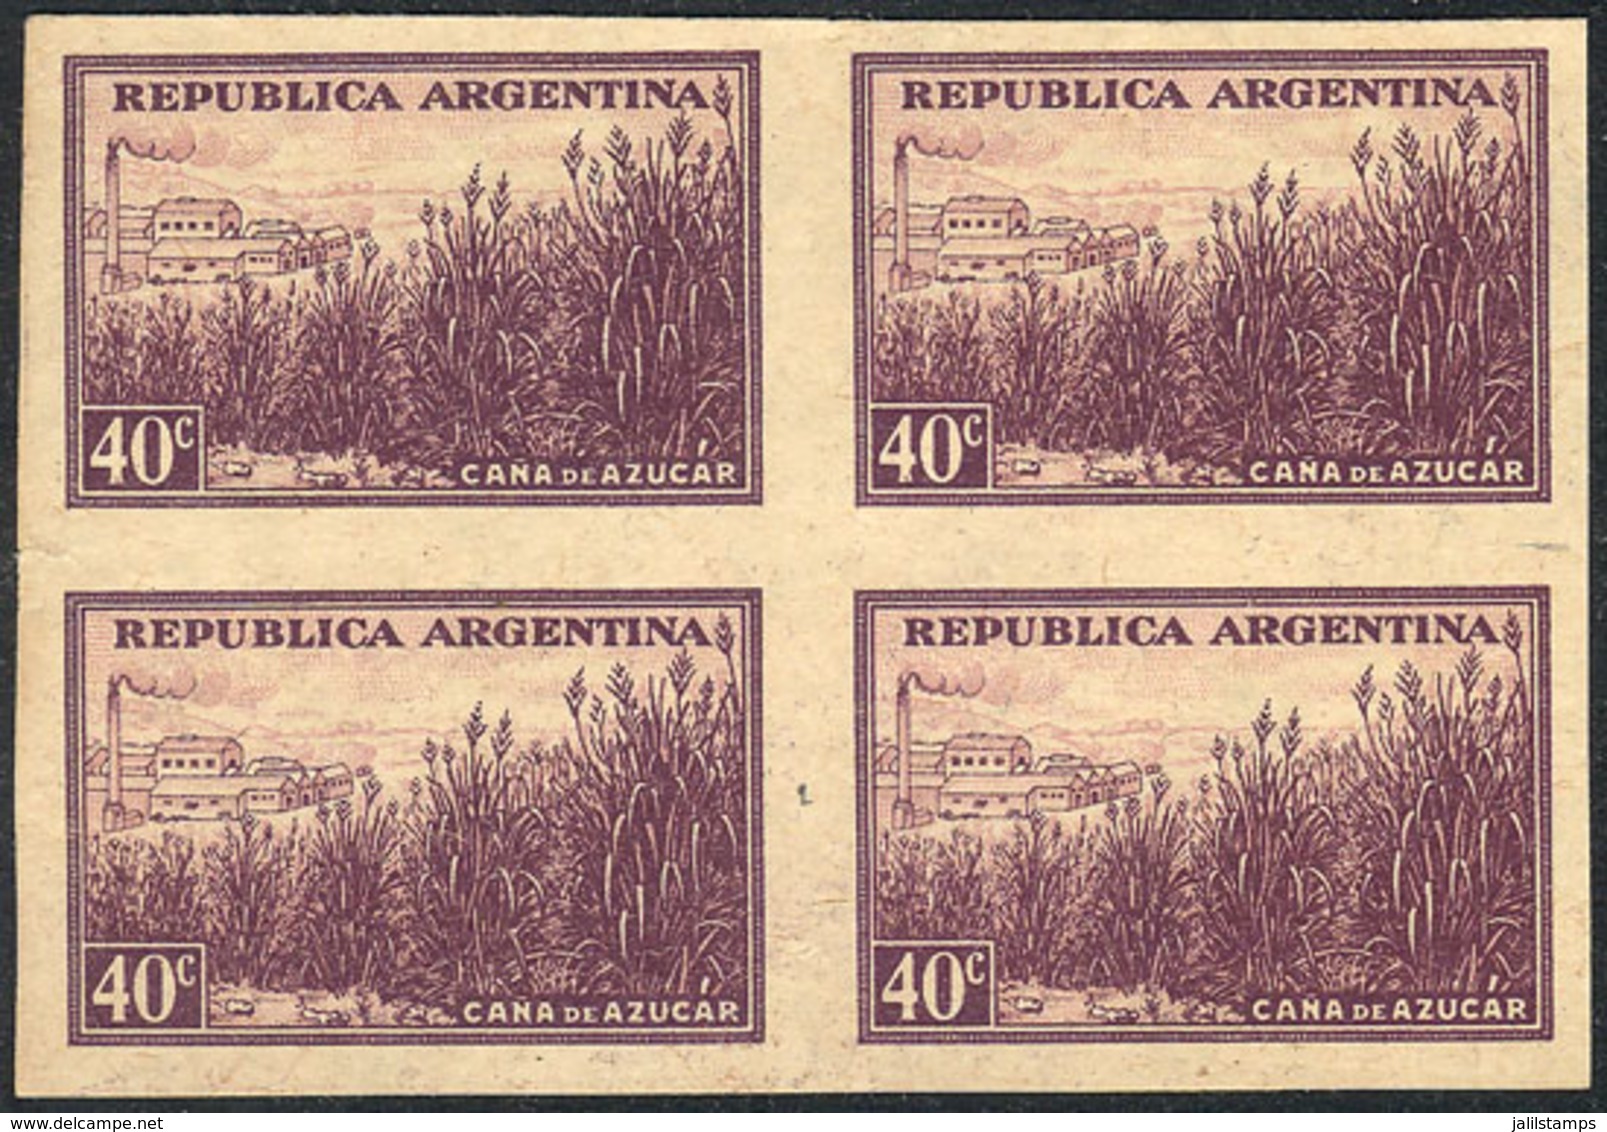 ARGENTINA: GJ.758, 1935/52 40c. Sugar Cane, PROOF In The Adopted Color, Printed On Special Paper For Specimens, Excellen - Gebruikt